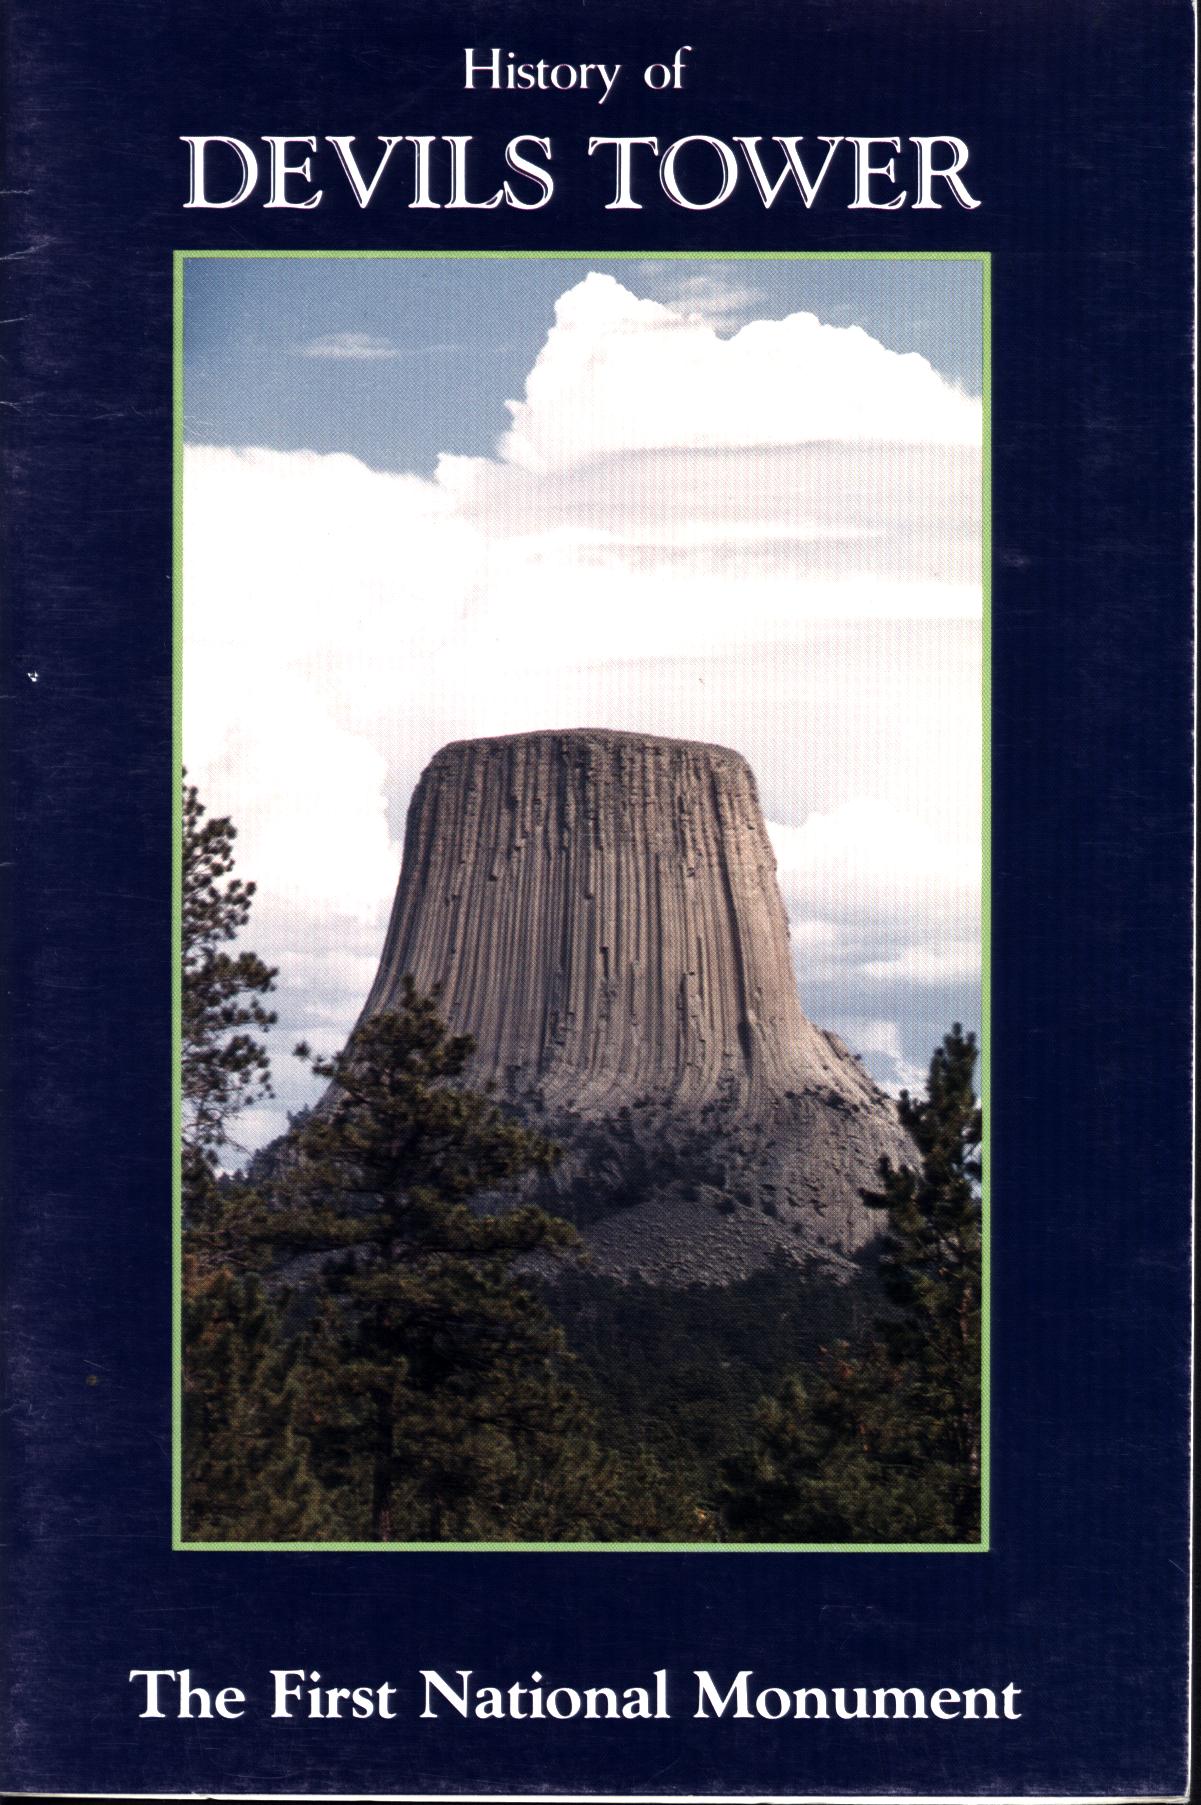 HISTORY OF DEVILS TOWER: the first national monument.